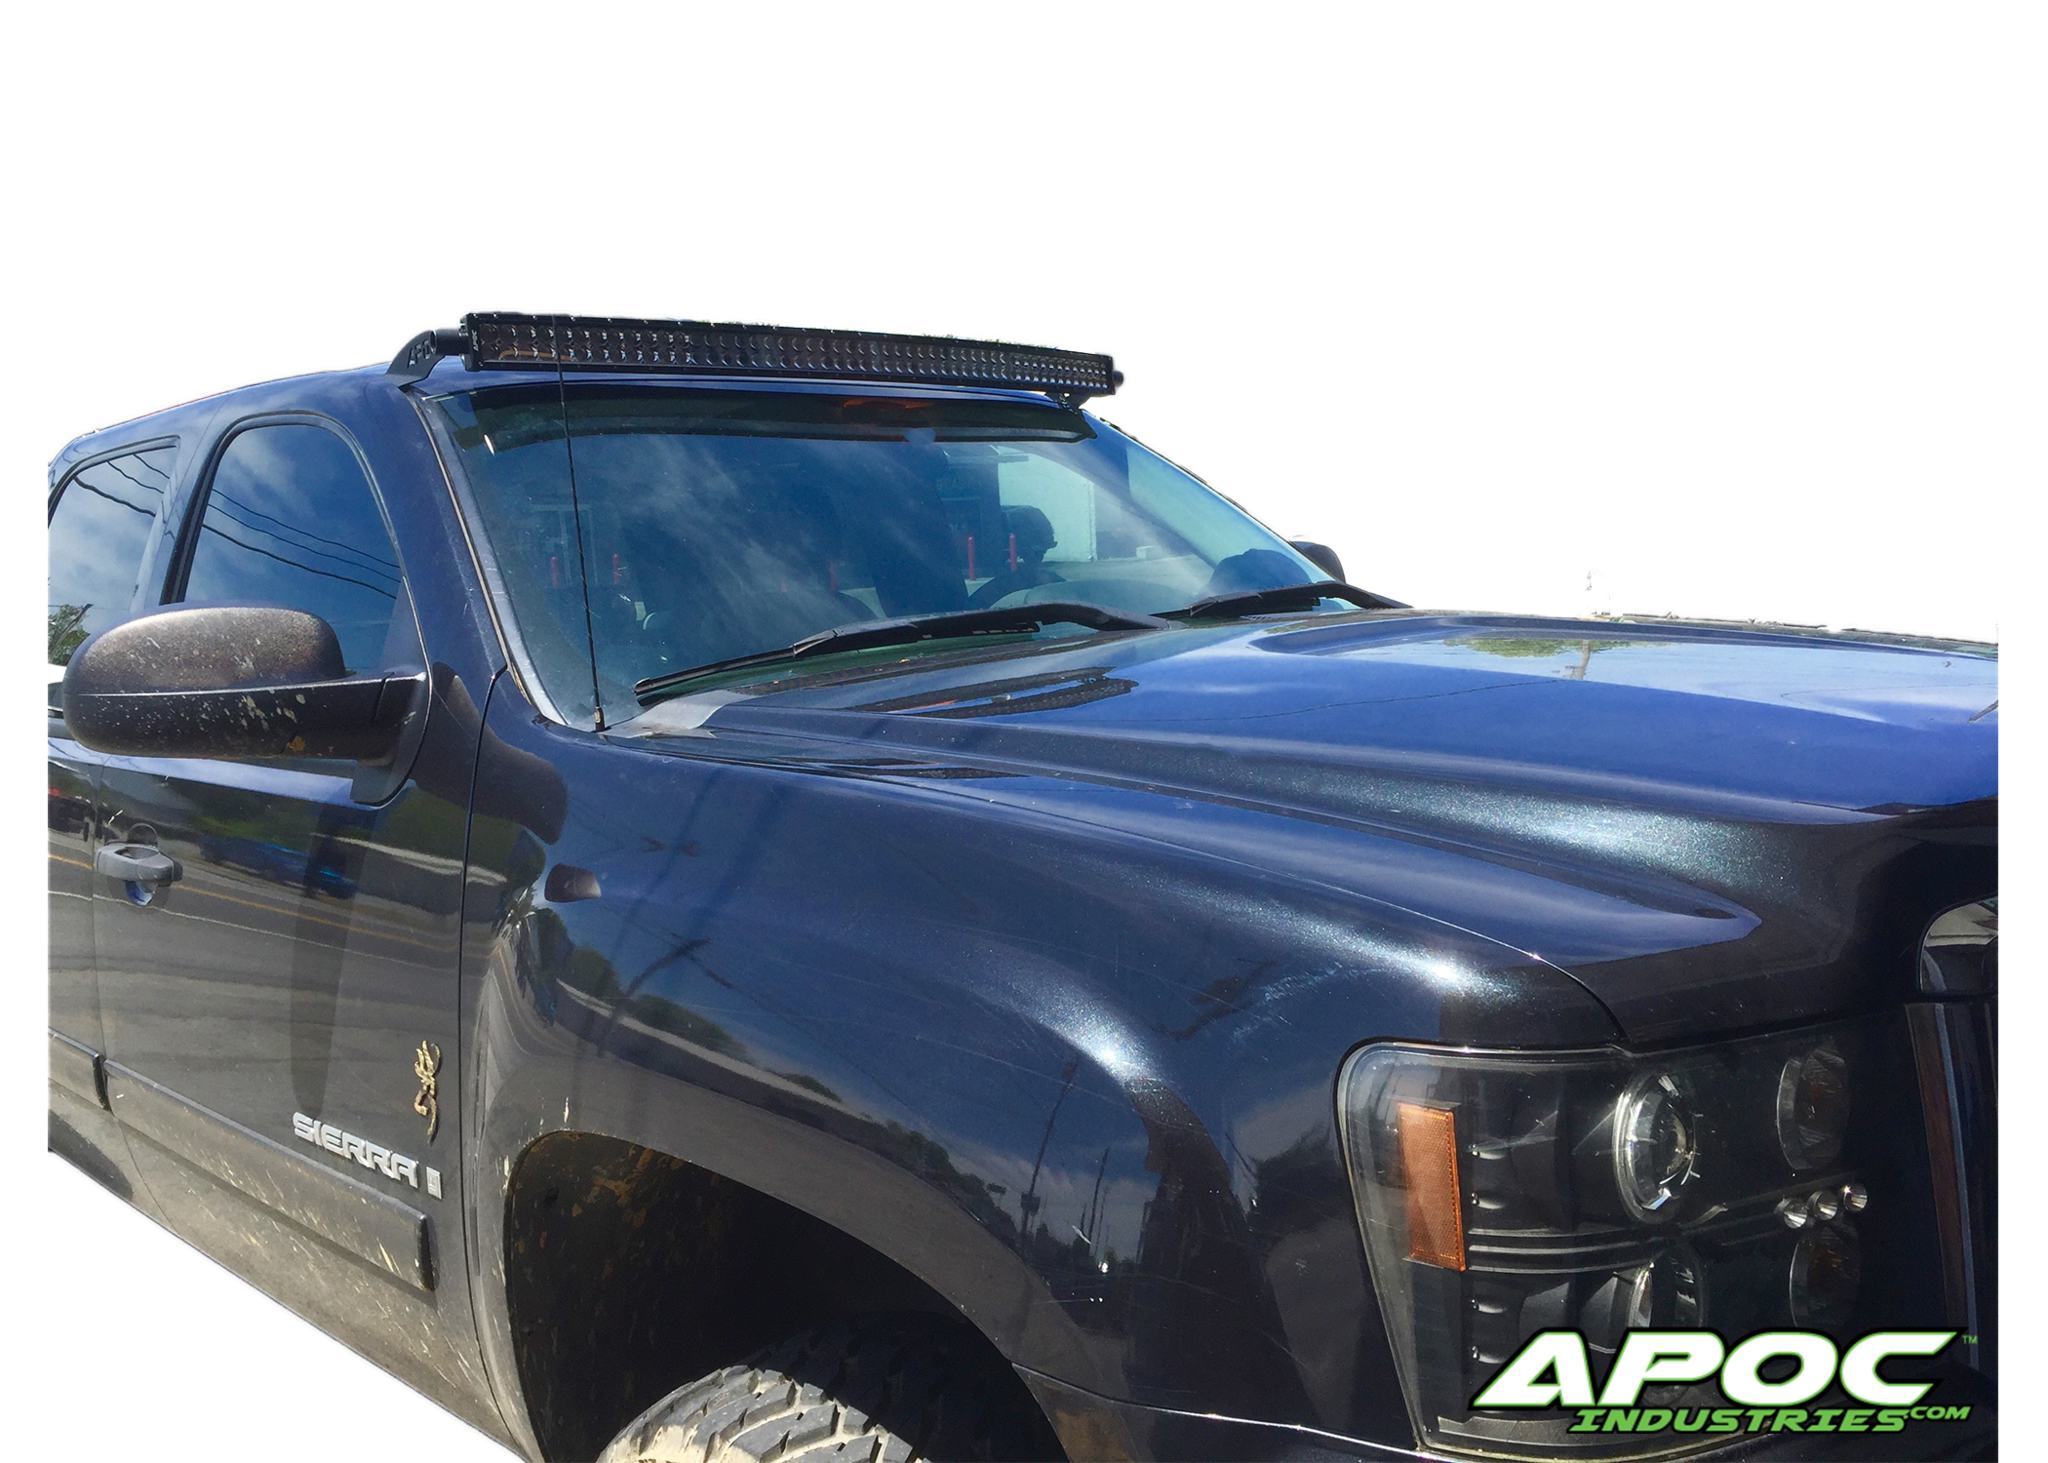 2007-2013 GMC Sierra Apoc Roof Mount for 52" Curved Led Light Bar - Apoc Industries